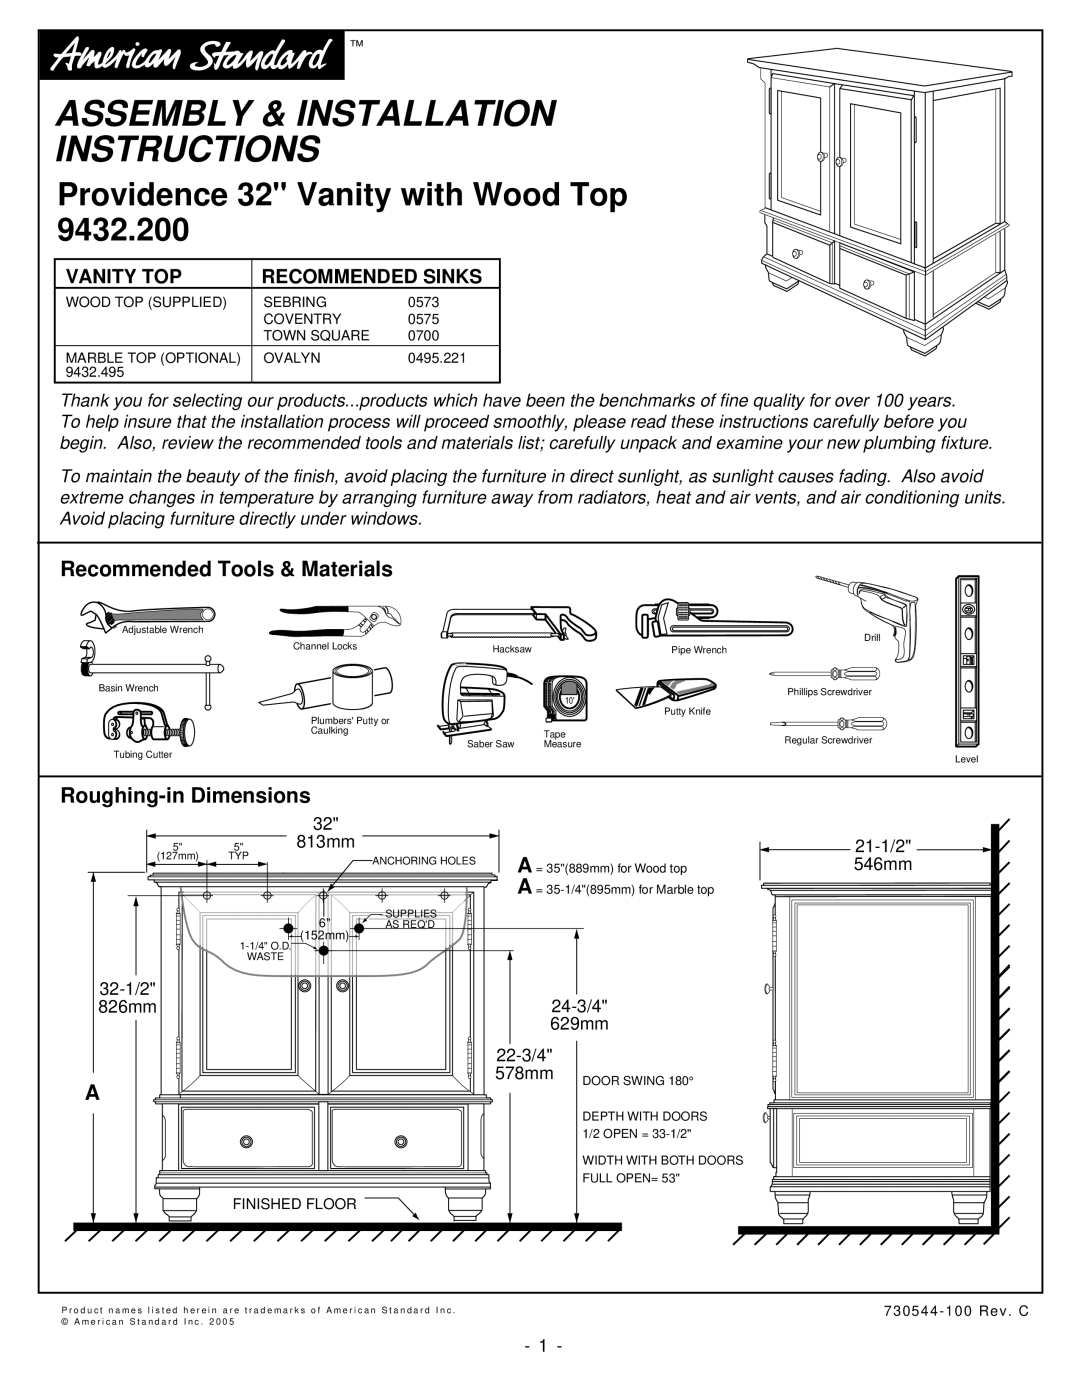 American Standard 9432.200 installation instructions Recommended Tools & Materials, Roughing-inDimensions, Vanity Top 